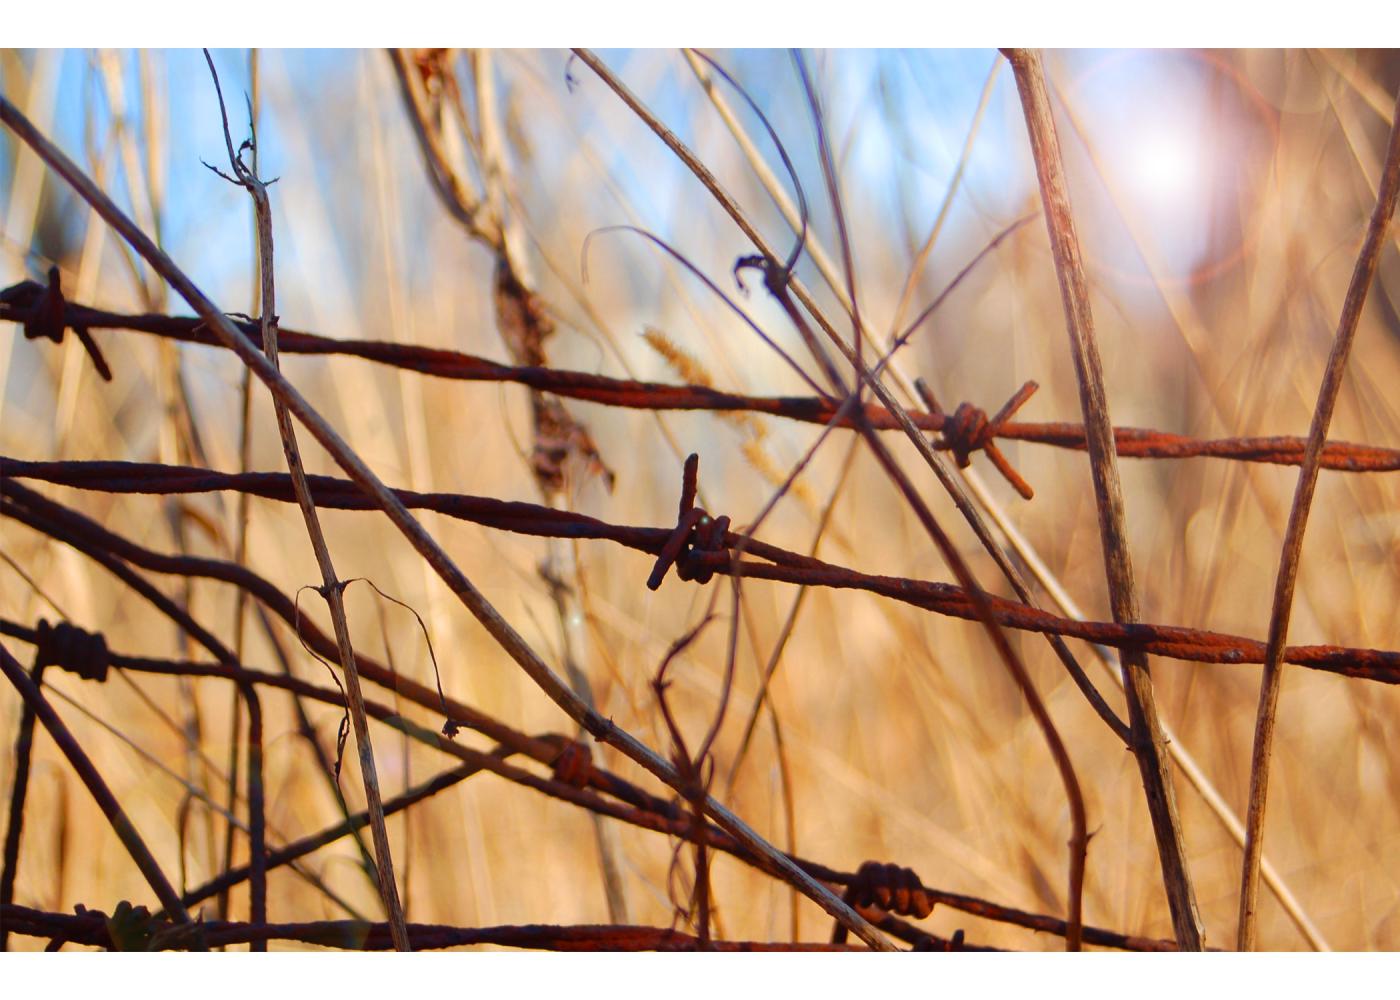 Light and plants fade behind some rusty barbed wire